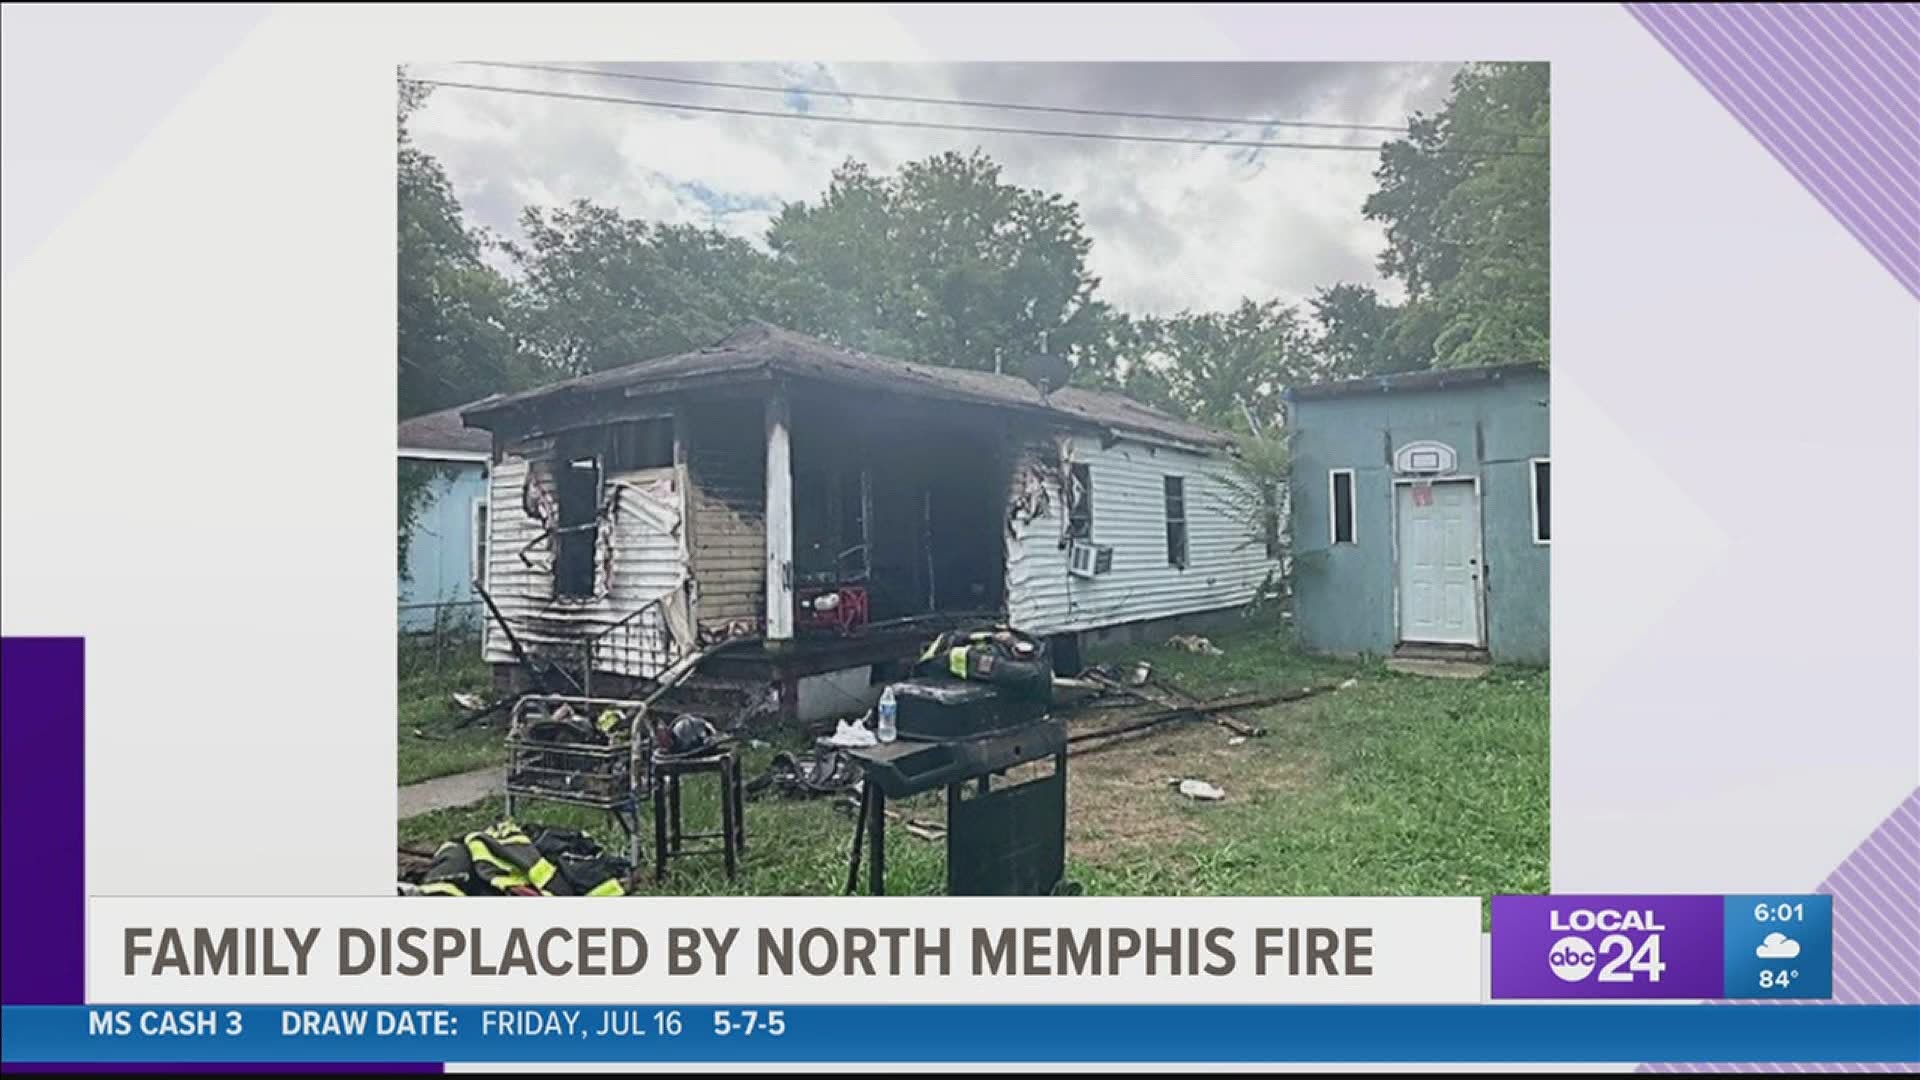 Anyone with information on the arson is asked to call Crime Stoppers at 901-528-CASH or the state arson hotline at 1-800-762-3017.